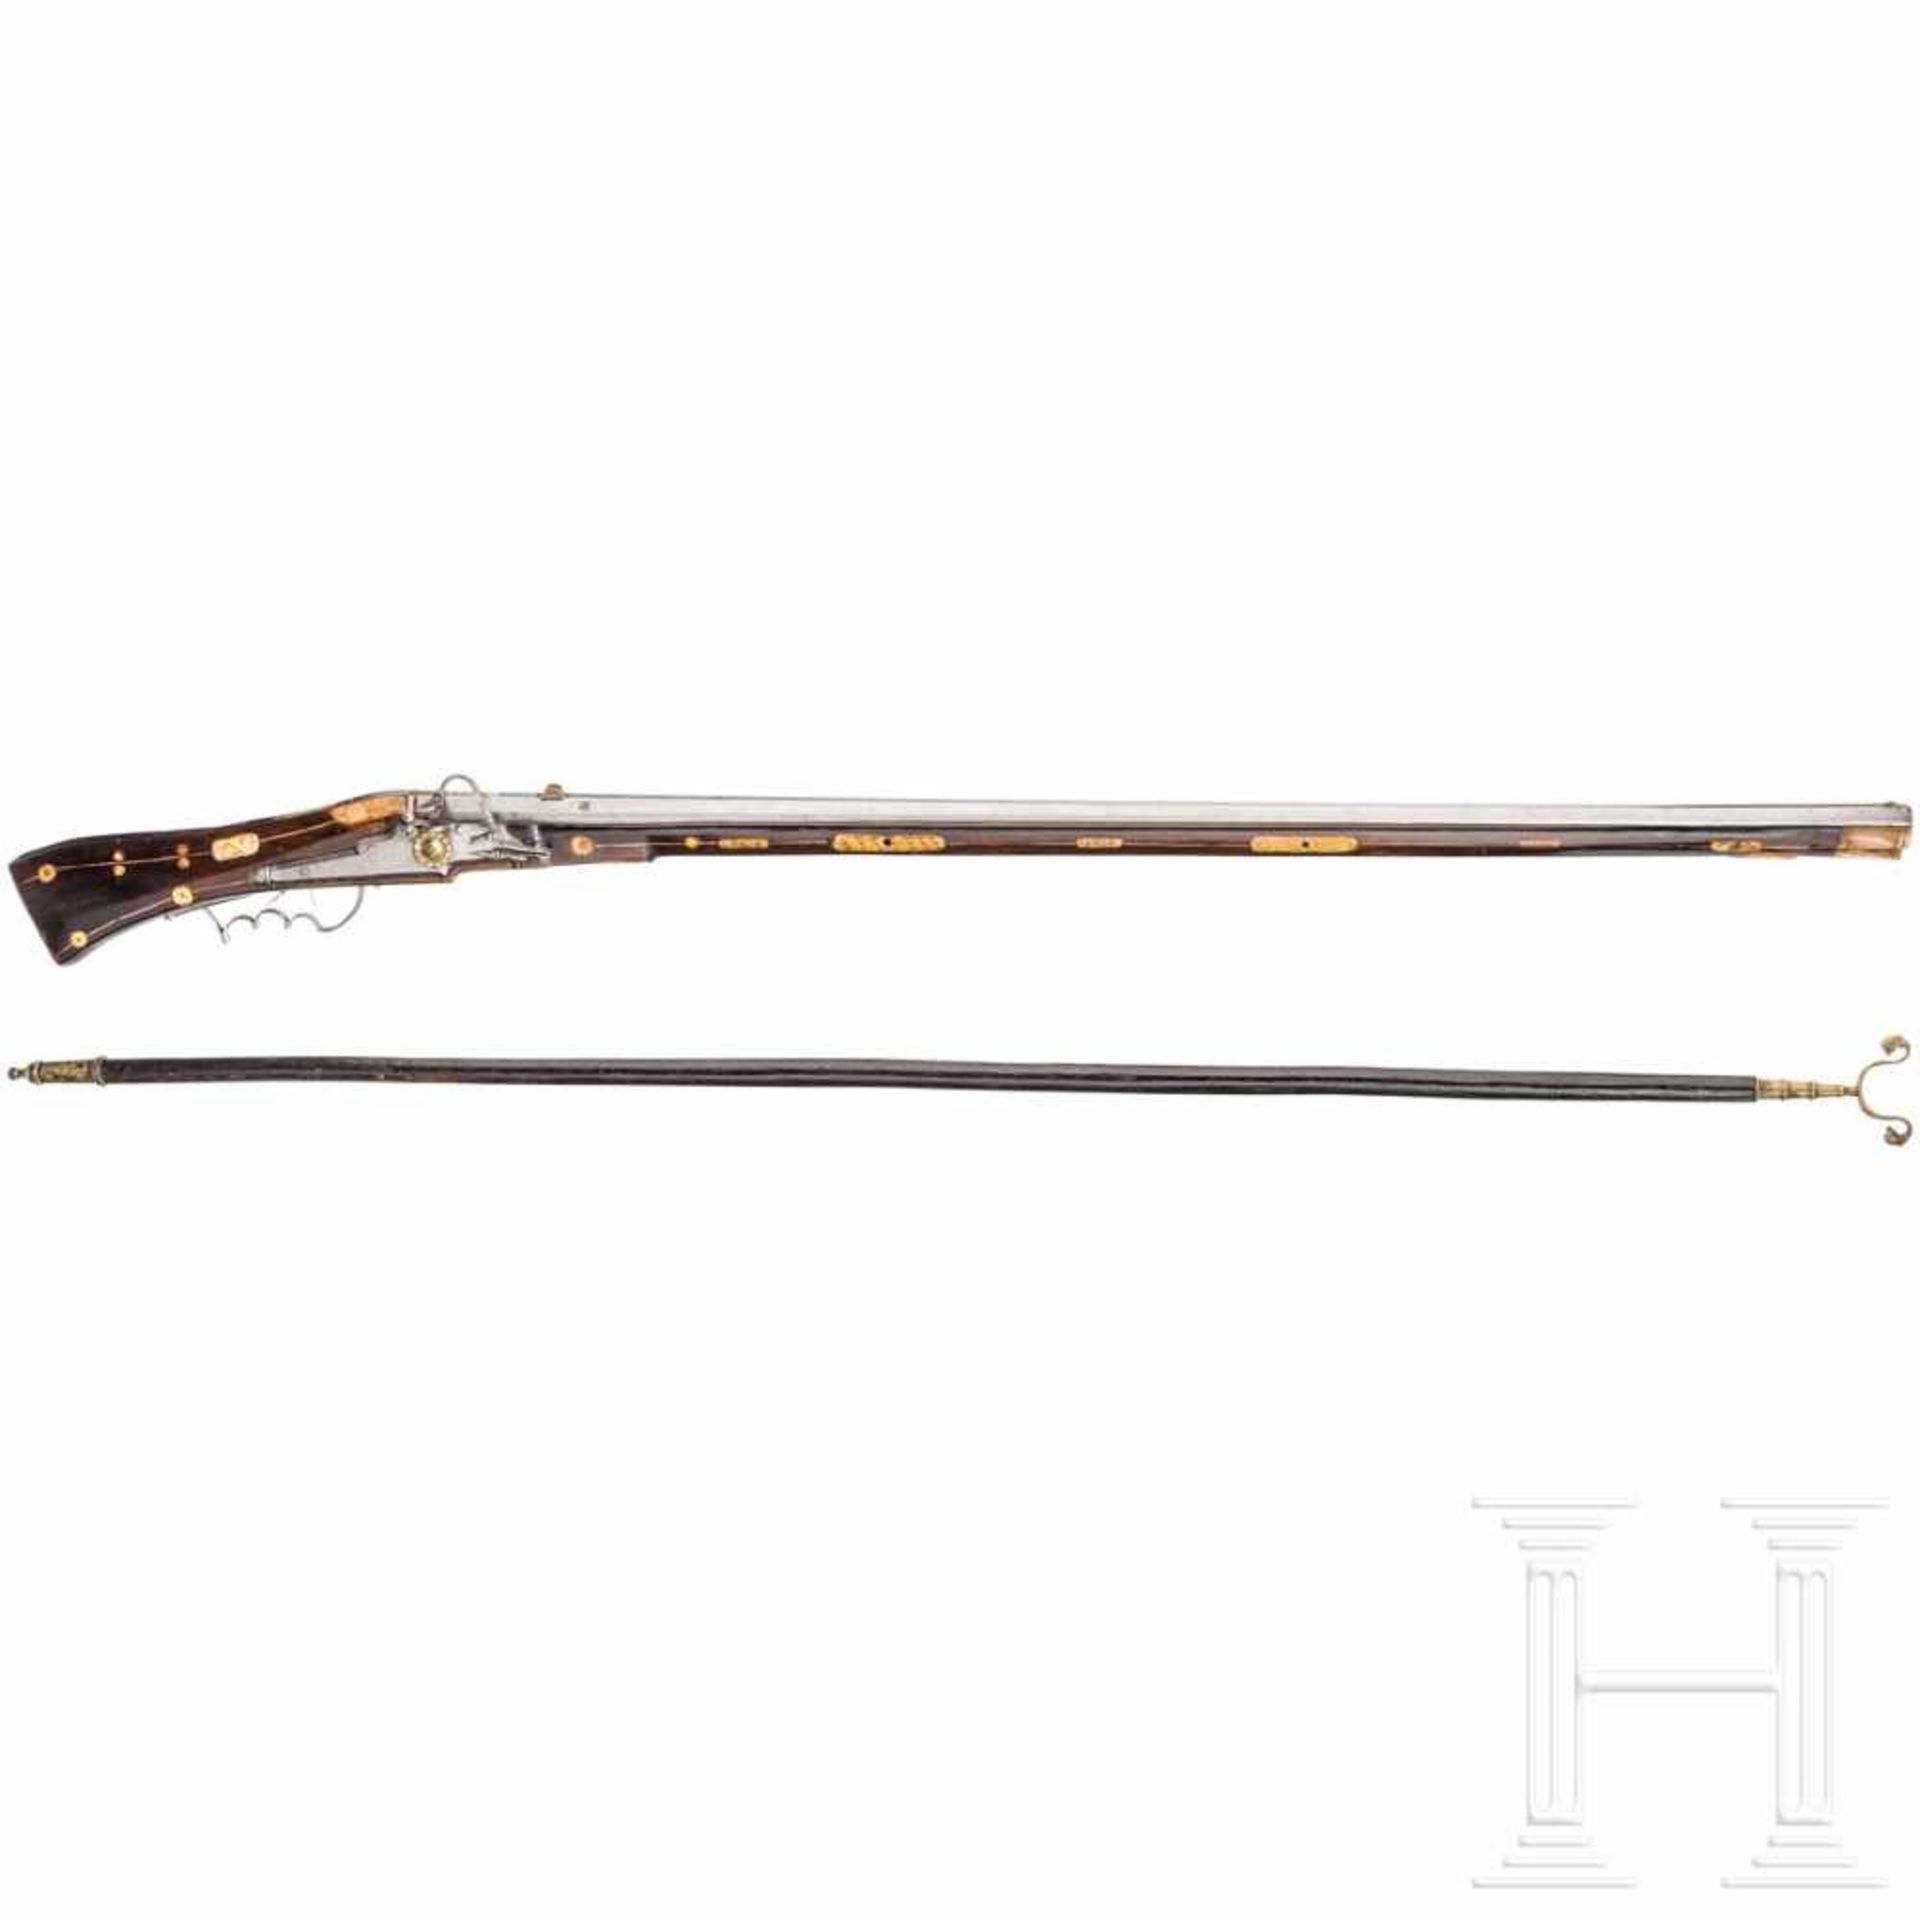 A heavy German bone-inlaid matchlock musket with musket support, dated 1589The octagonal barrel